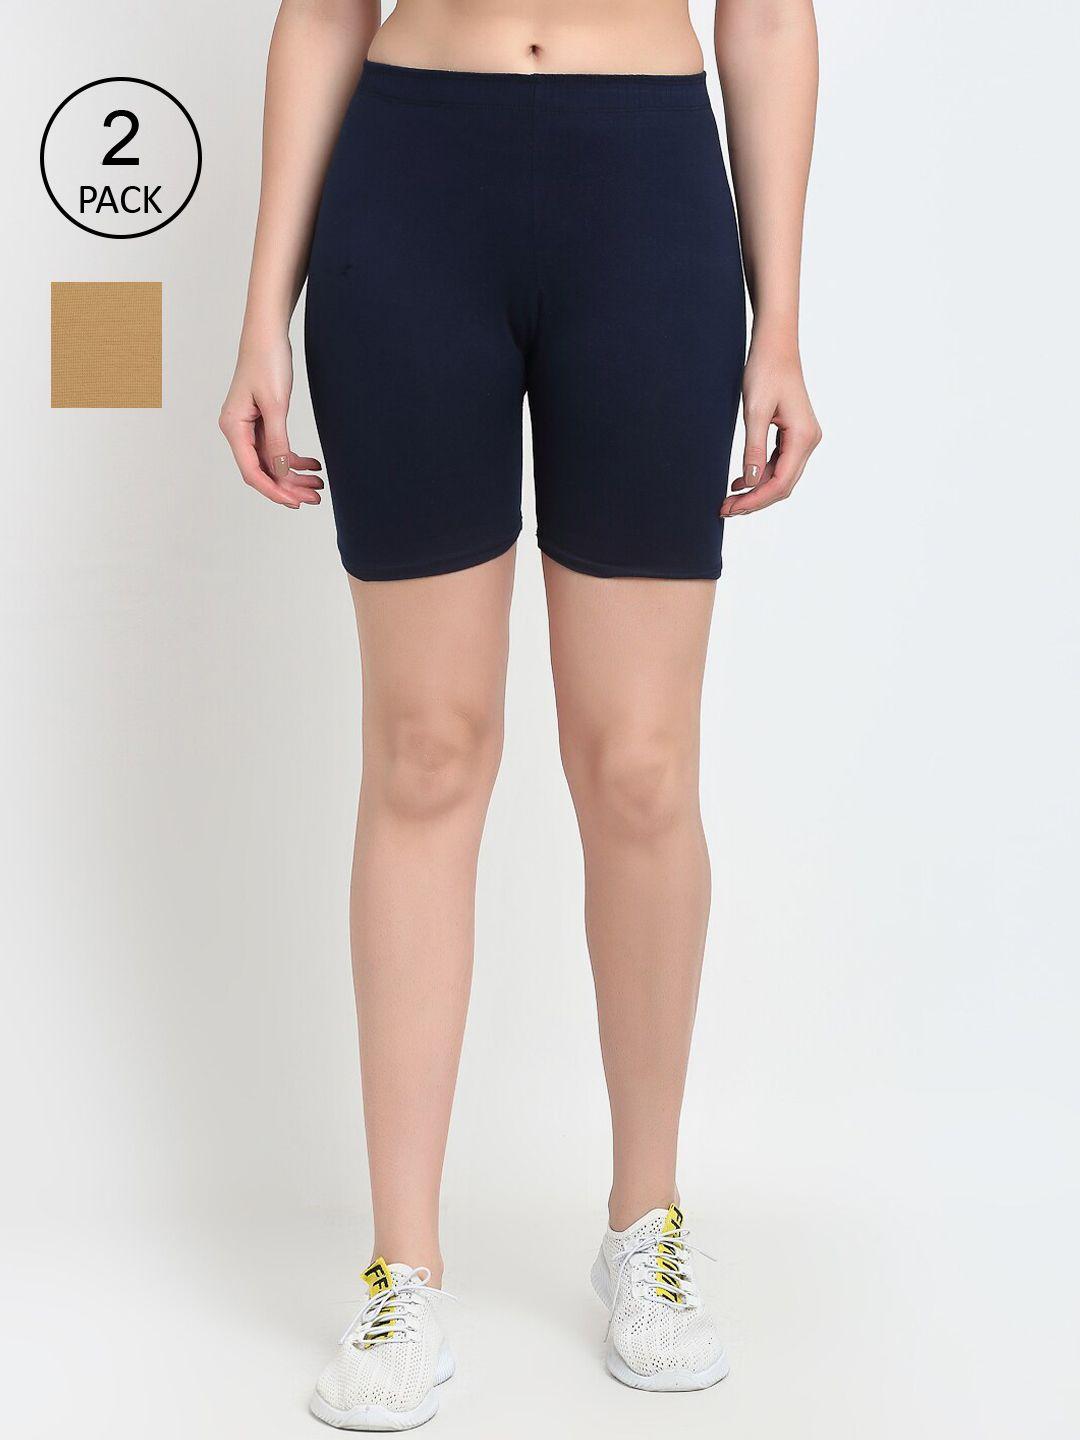 gracit-women-pack-of-2-navy-blue-&-nude-cycling-sports-shorts